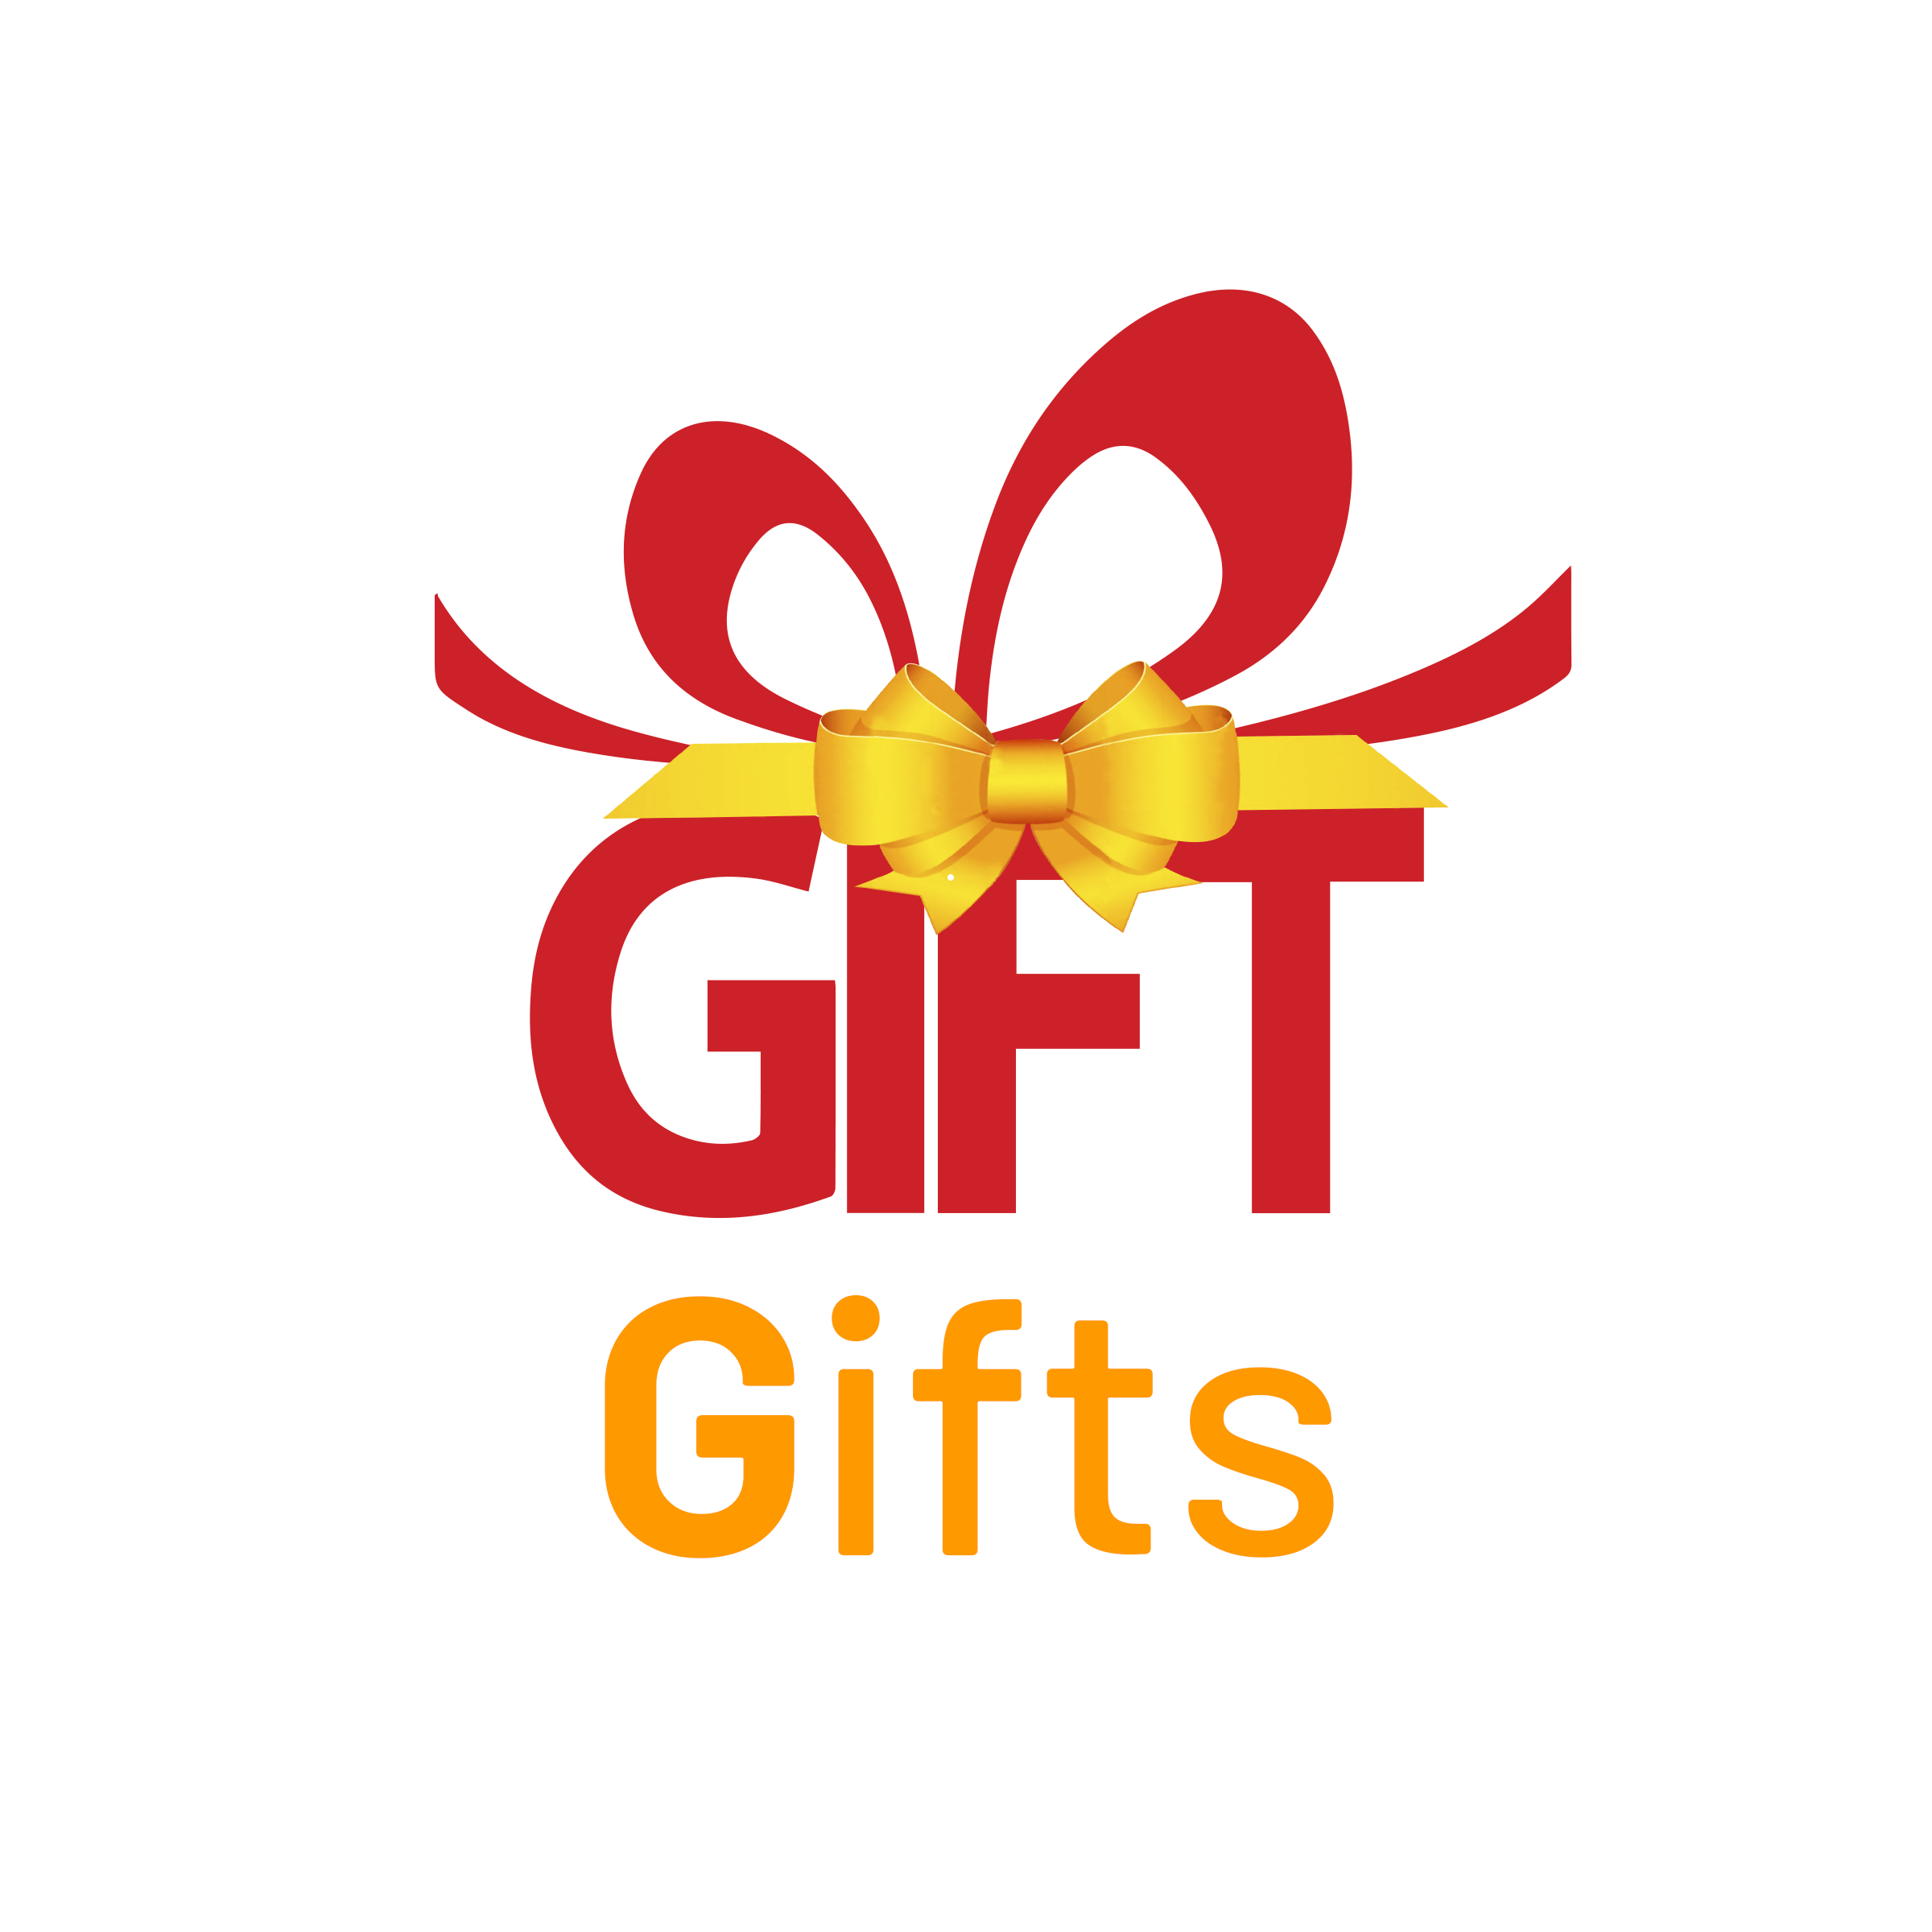 Image for gifts category